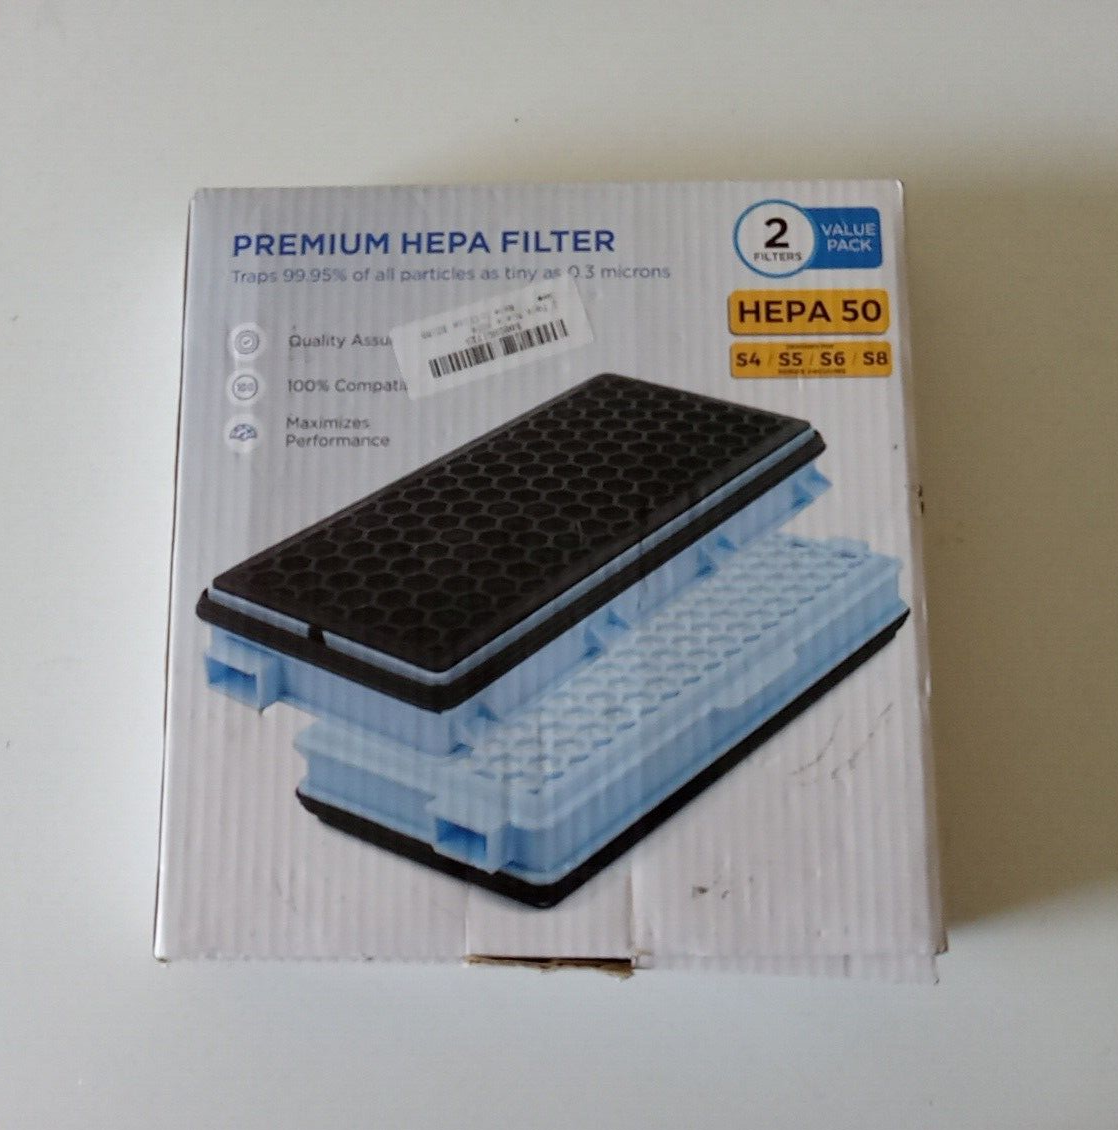 Active HEPA Vacuum Filter for Miele SF-HA50F Models S4,S5,S6,S8 5996882, 9616280 - $12.19